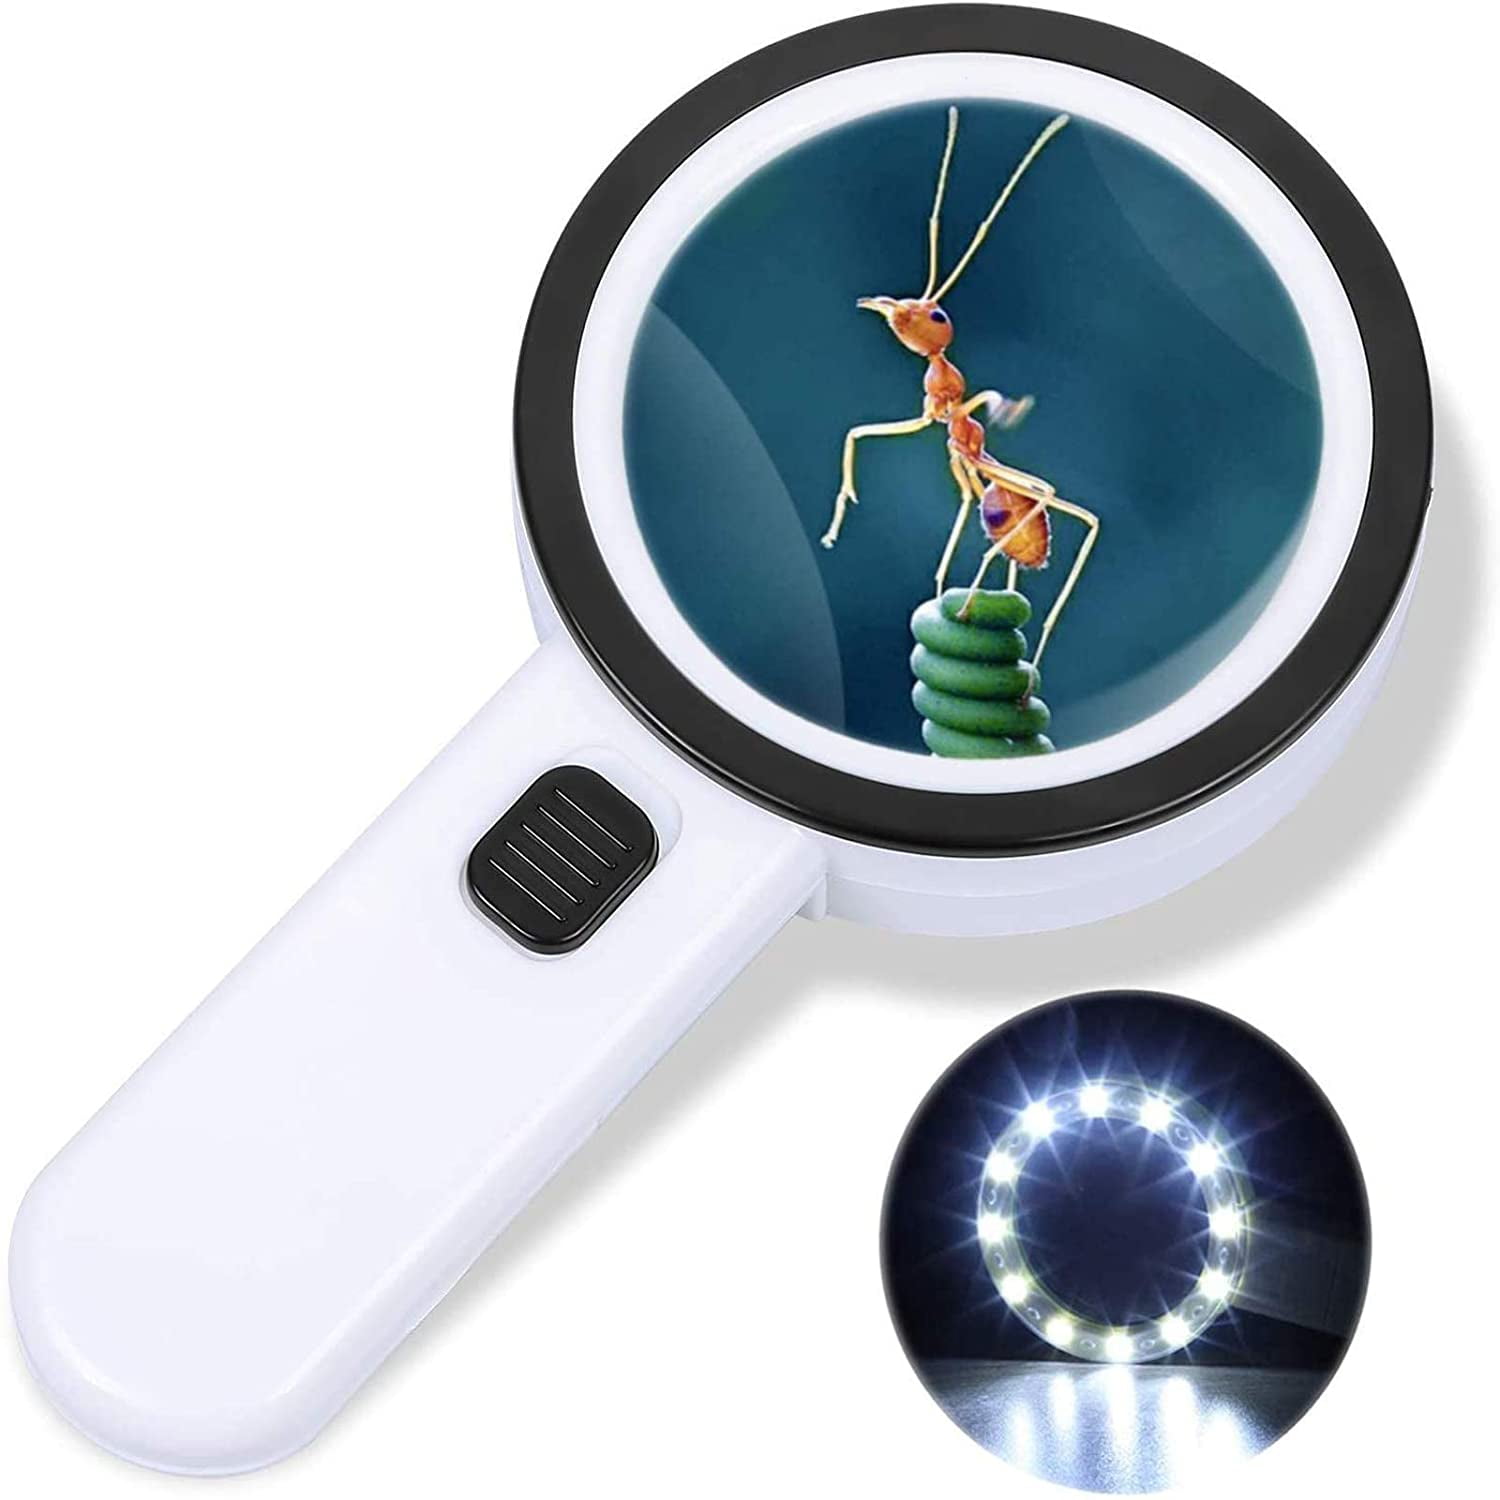 Source Large Magnifying Glass with Light, Handheld Illuminated Magnifier  for Macular Degeneration and Seniors Reading on m.